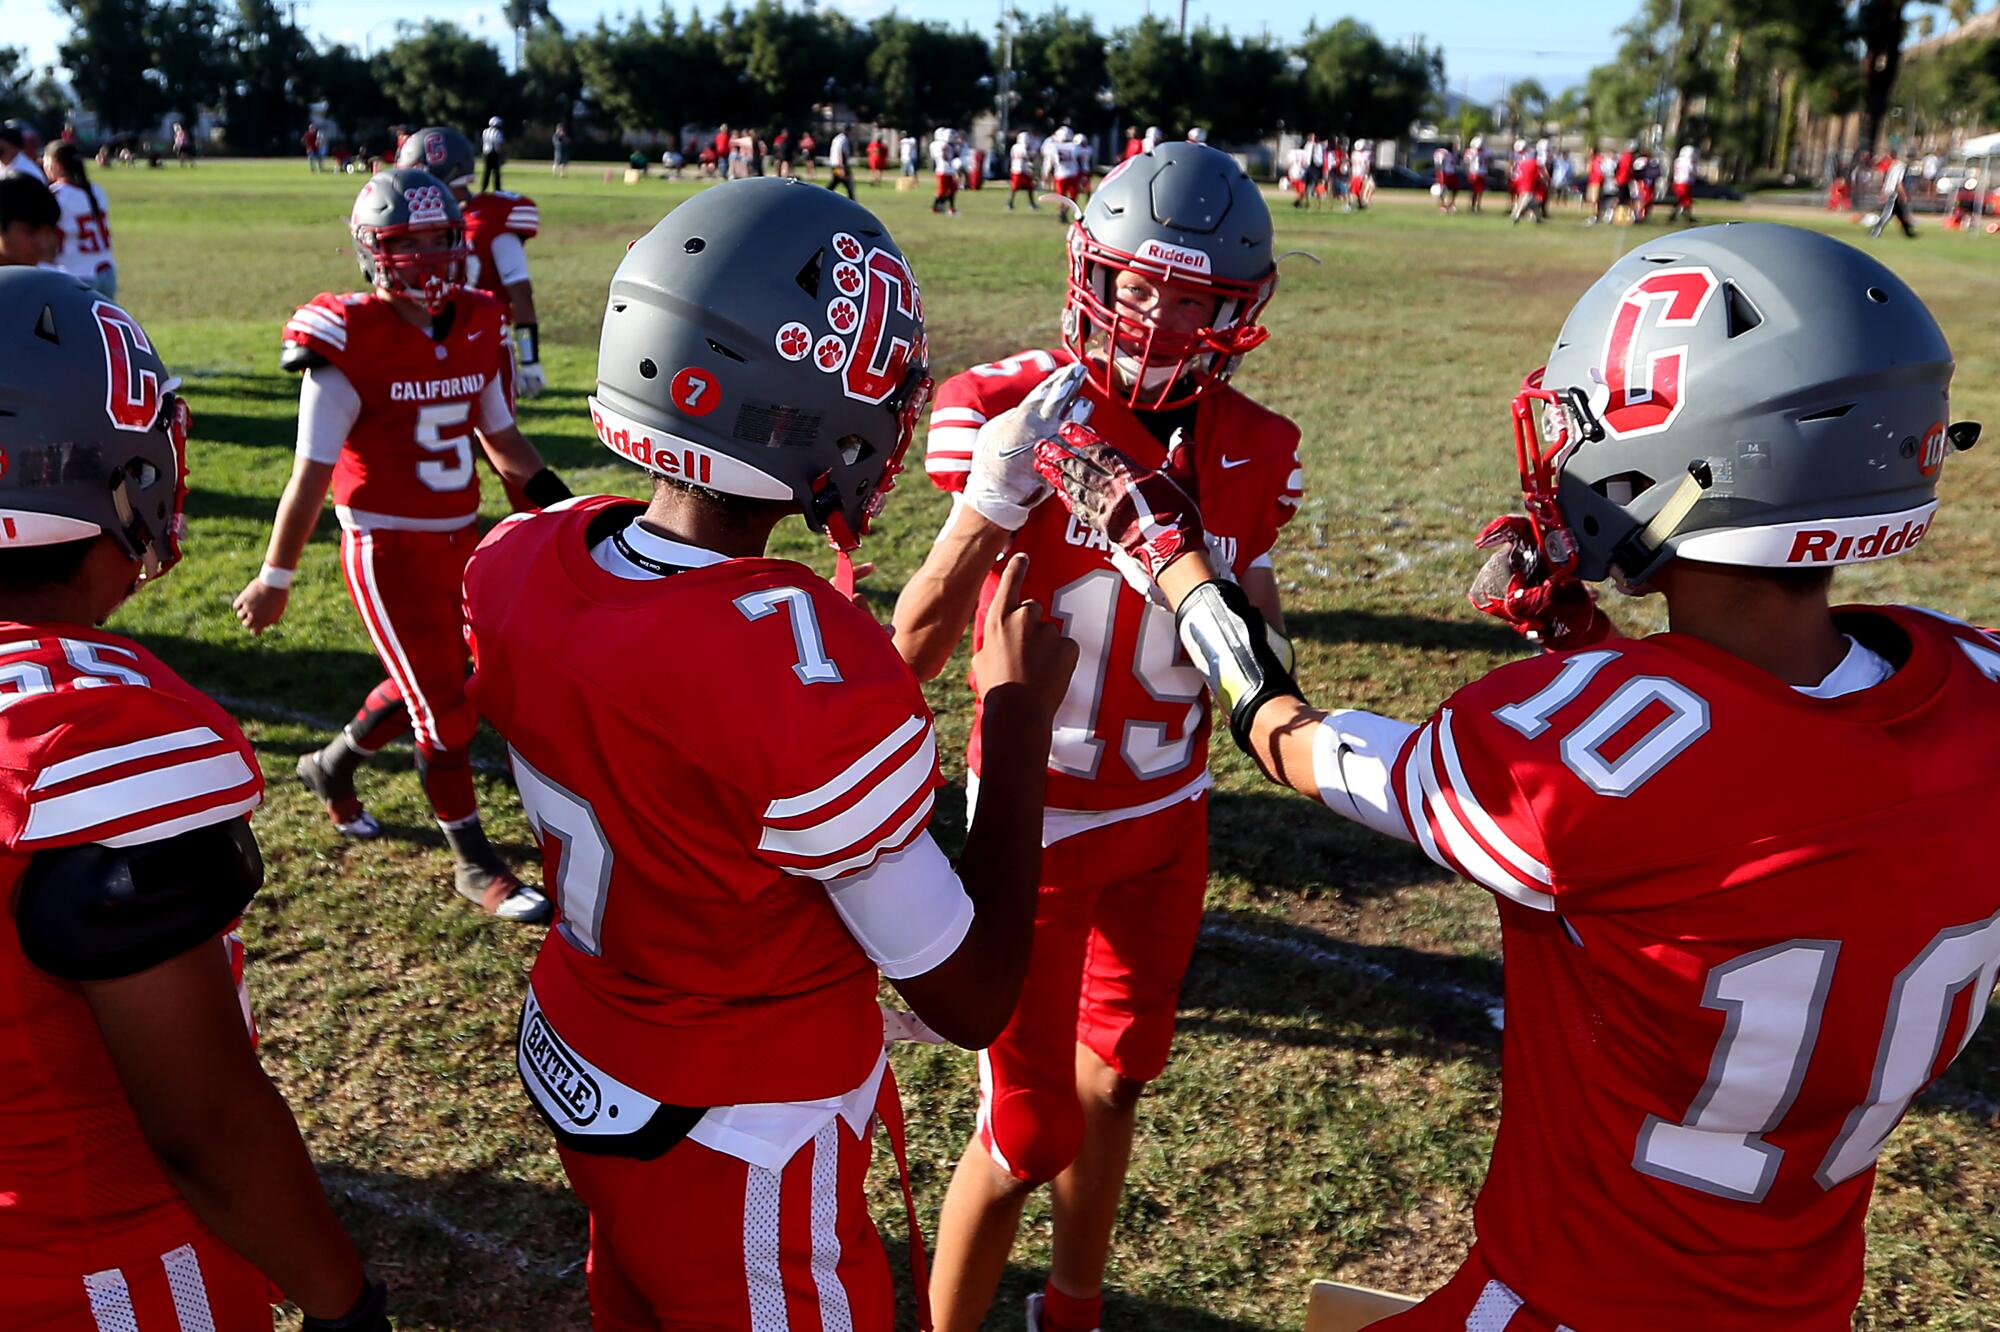 CSDR football player communicate in sign language during a game Saturday.